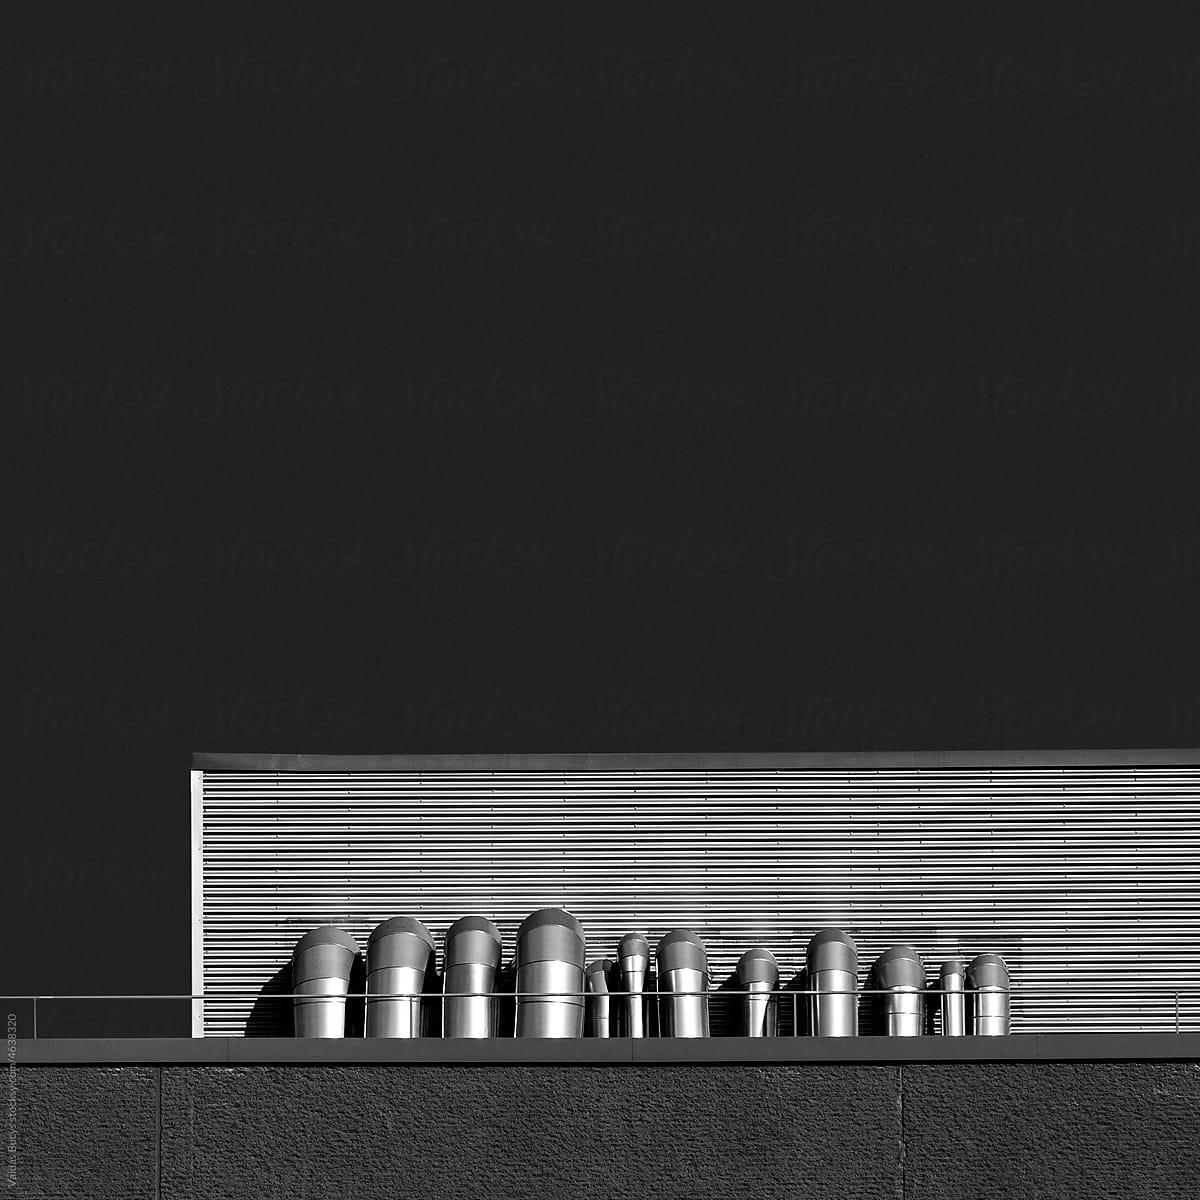 Abstract minimalist industrial building detail with metal pipes